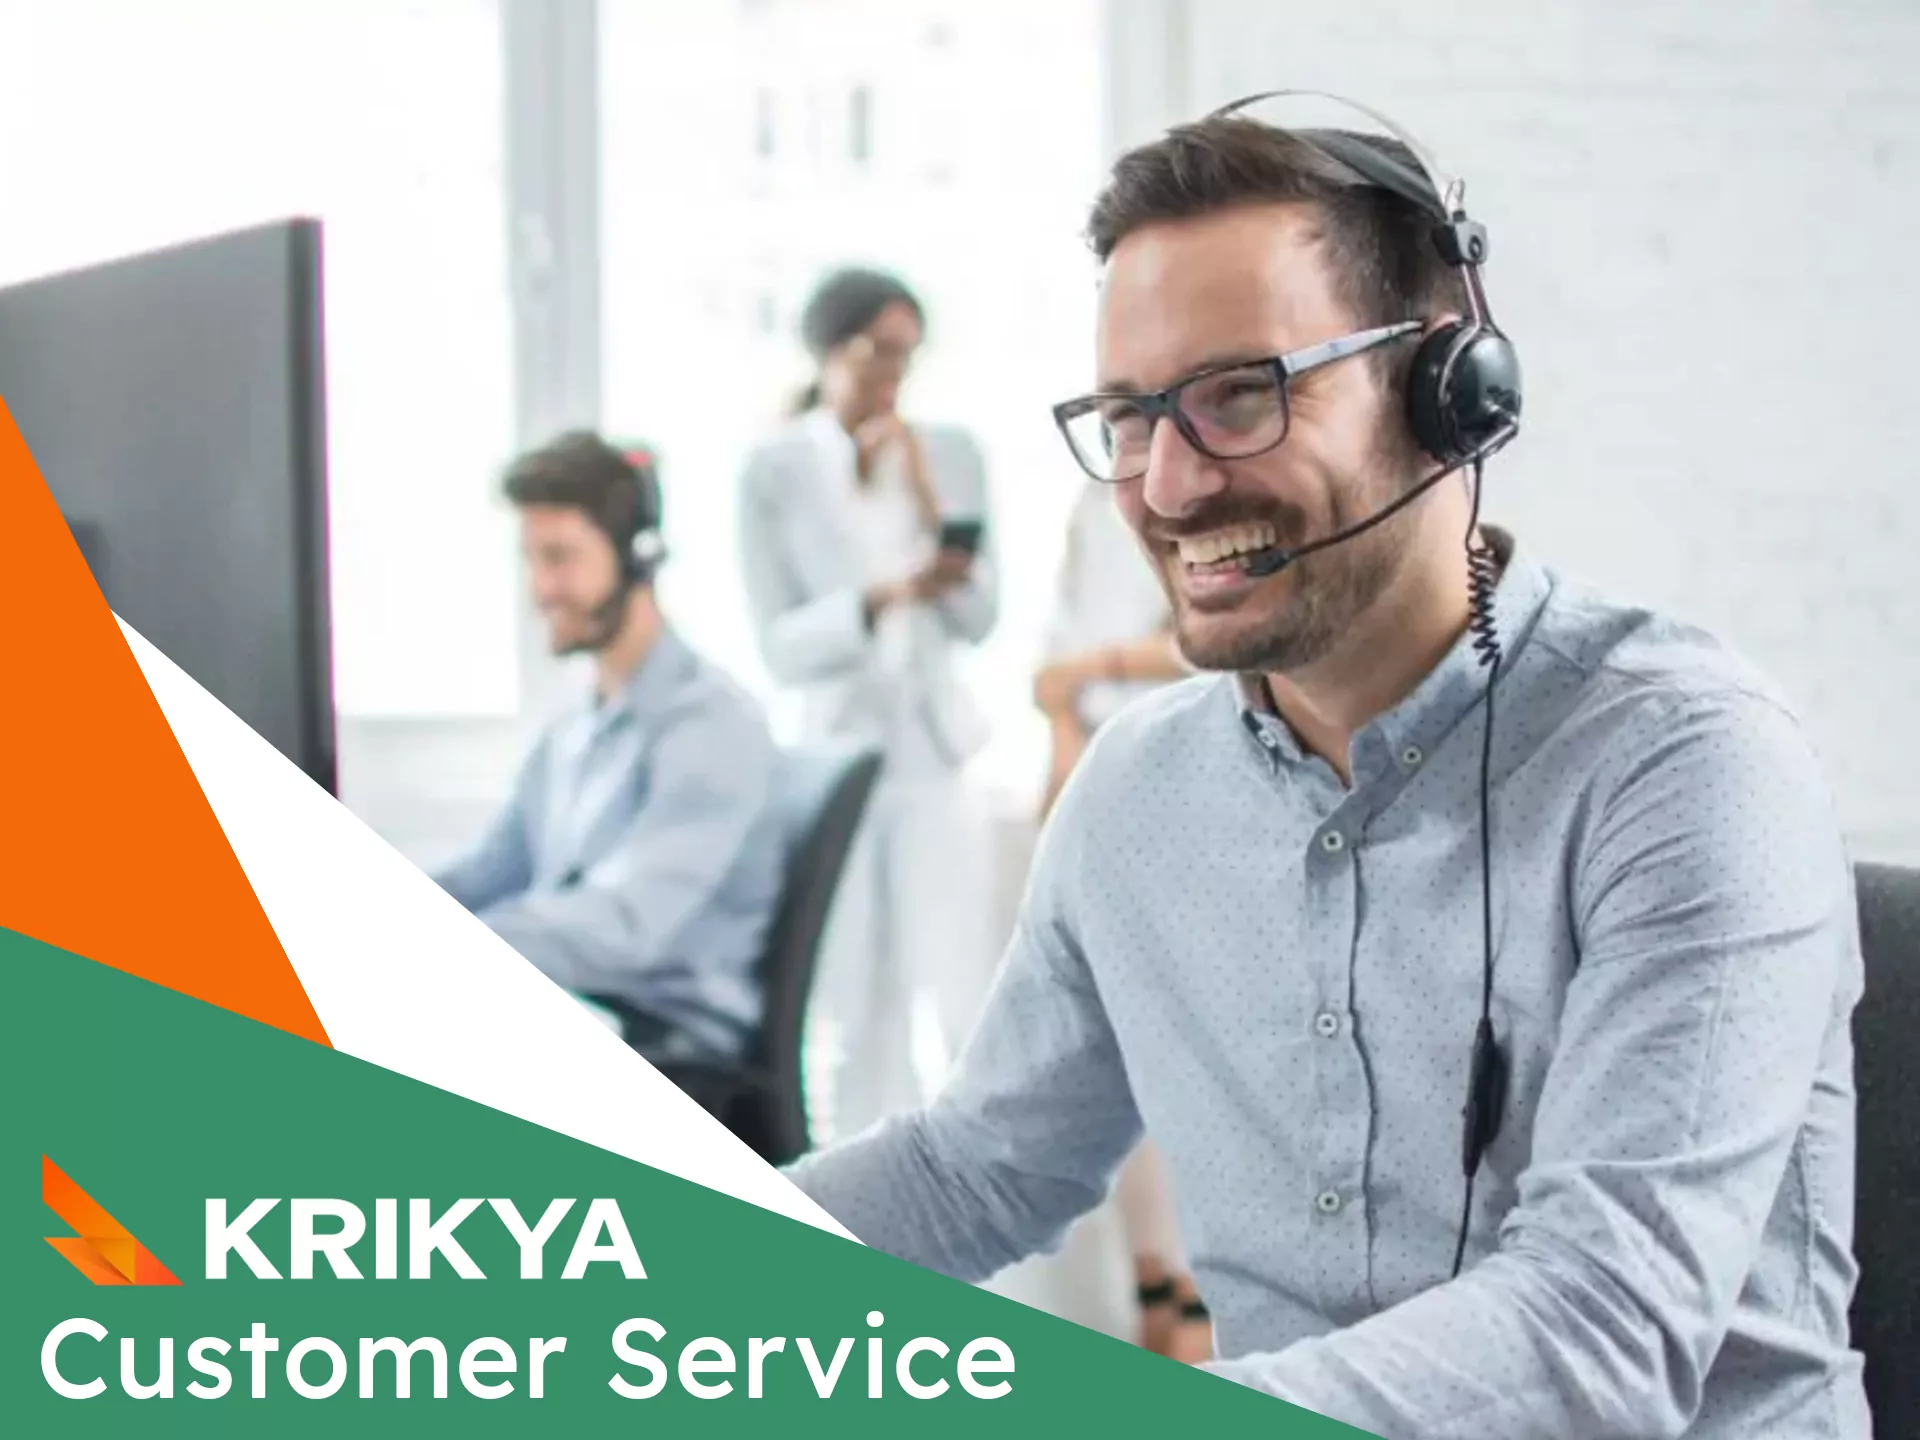 Ask for Krikya support if you have trouble with something.